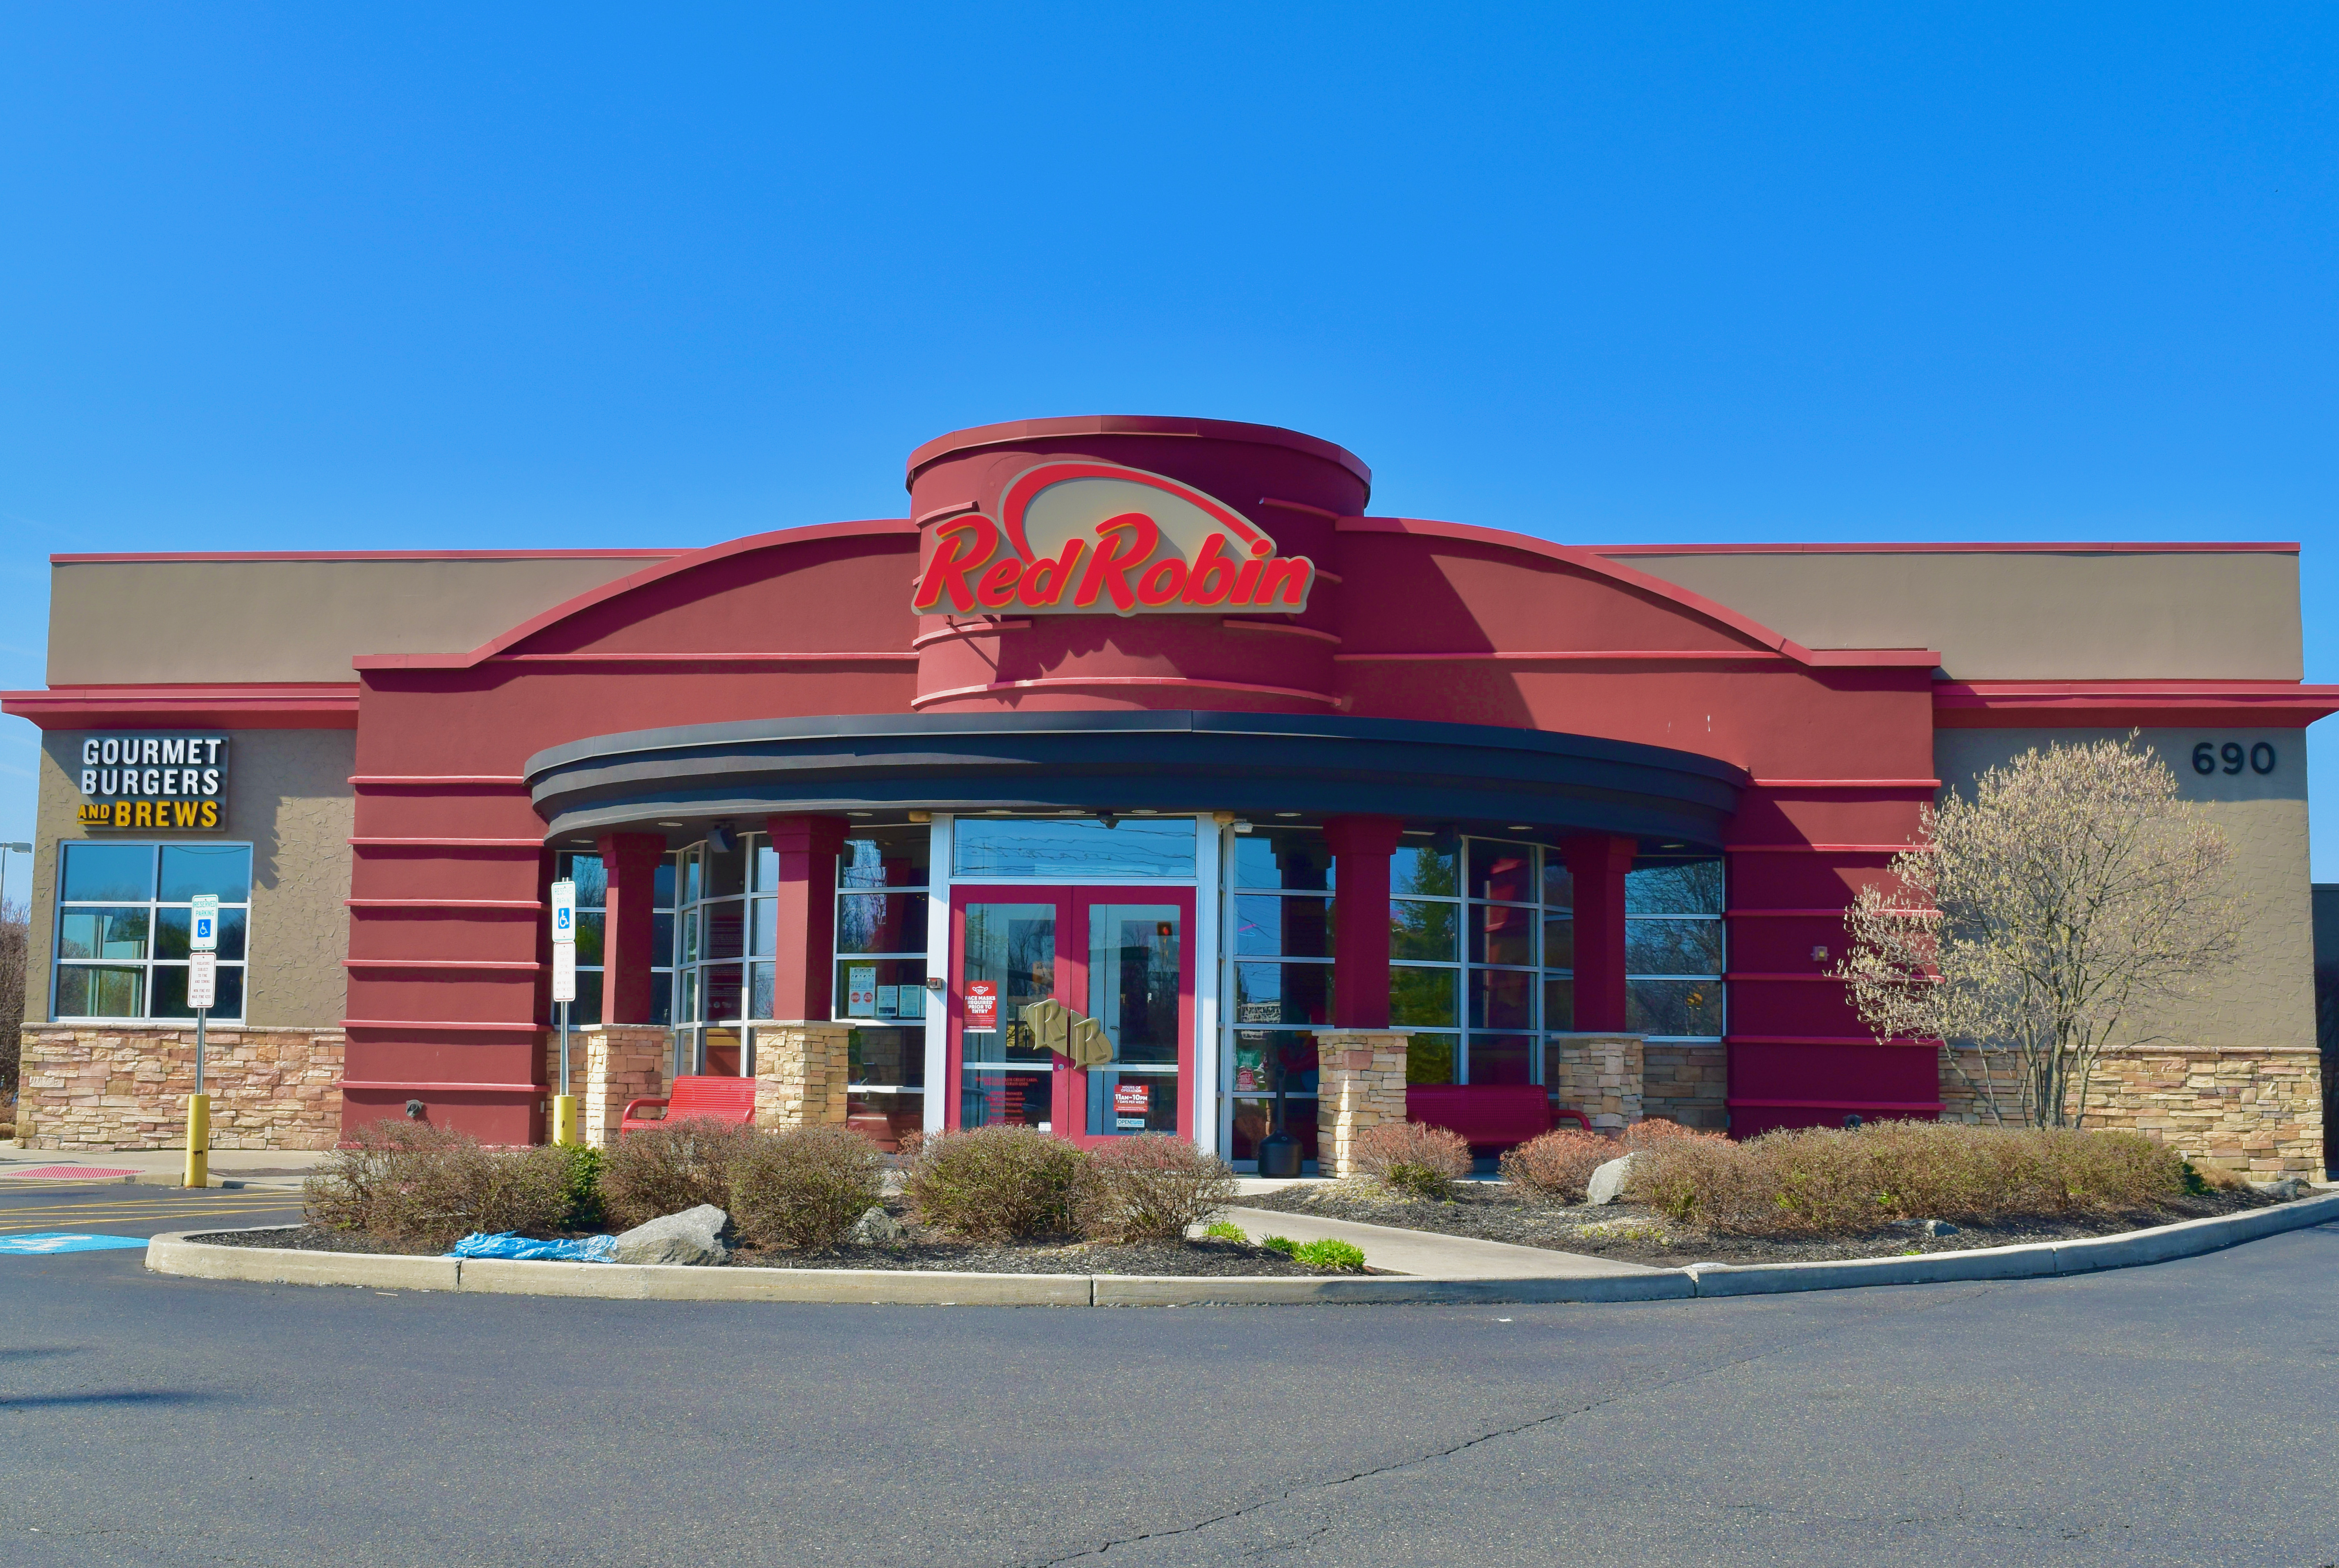 Exterior of the Red Robin Restaurant in Quakertown, PA